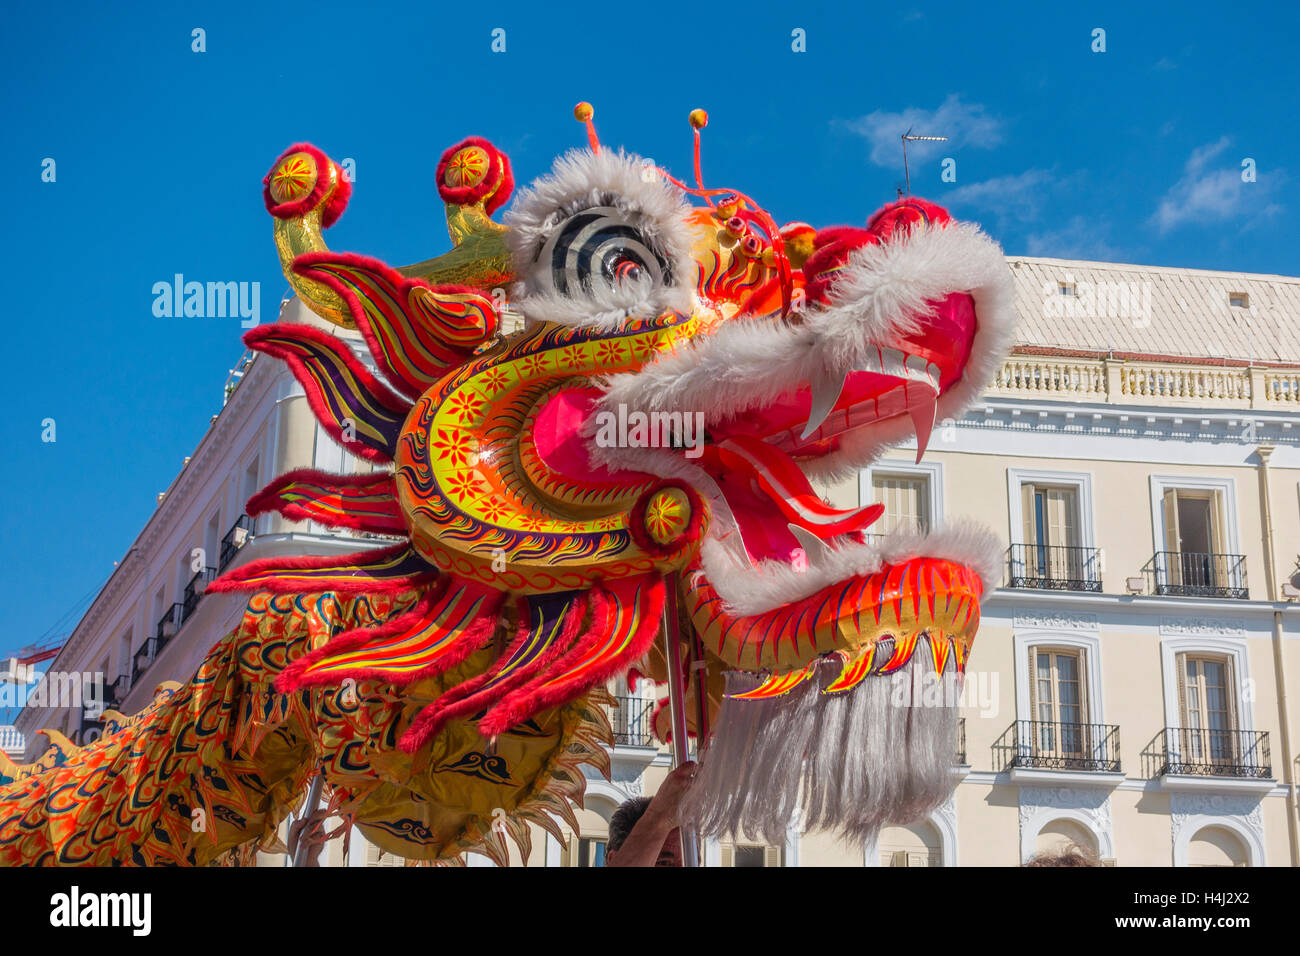 Close-up of dragon's head in the Chinese dragon dance in Puerta del Sol, Madrid, Spain. Stock Photo